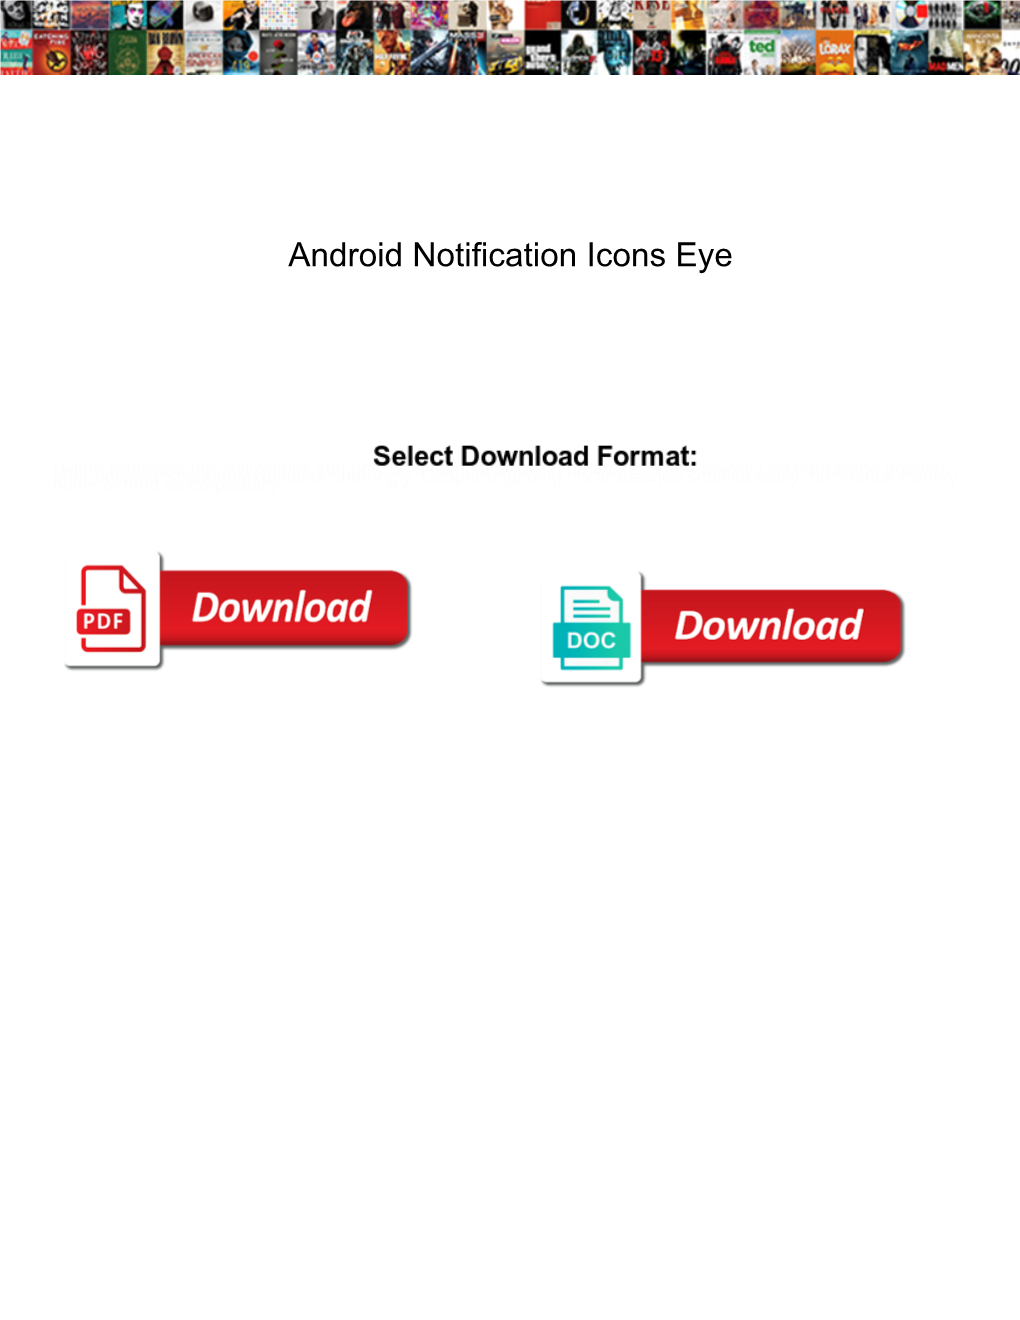 Android Notification Icons Eye